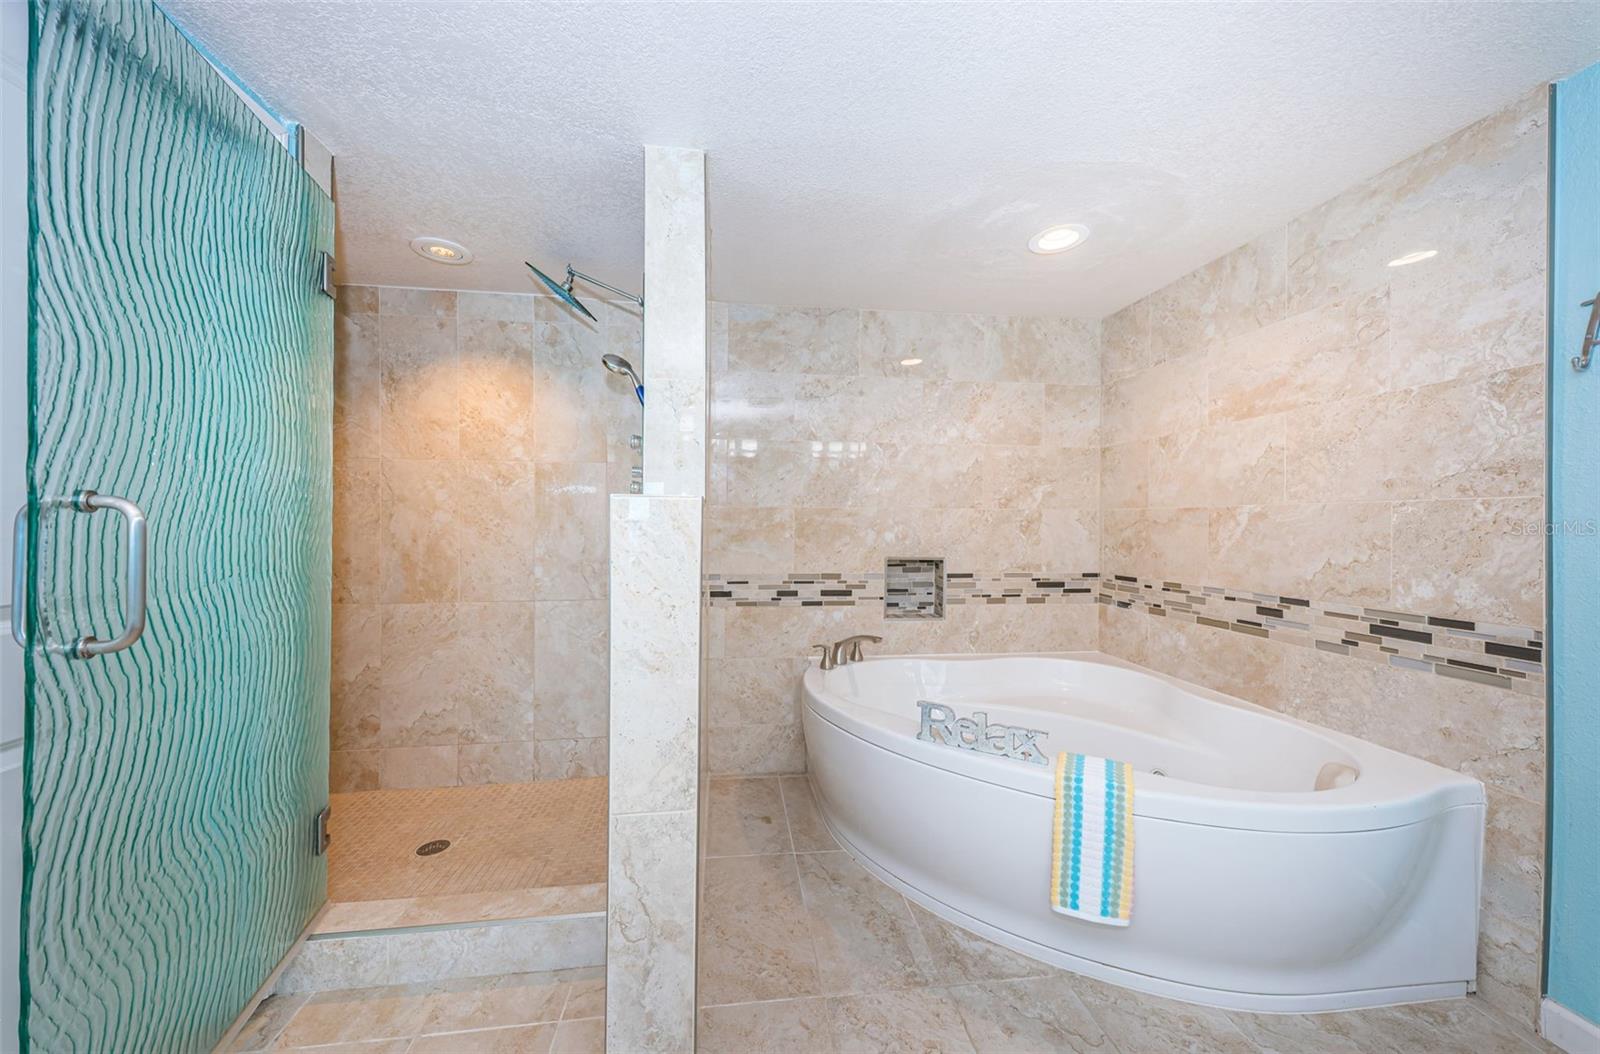 ... One Party Wanted a Walk in Shower - The Other Party Wanted a Spa Soaking Tub.. Answer was to Combine & Remodel Two Rooms and Keep Peace in the Household.. Walk In Shower to the Left and Soaking  Spa Tub  to the Right..